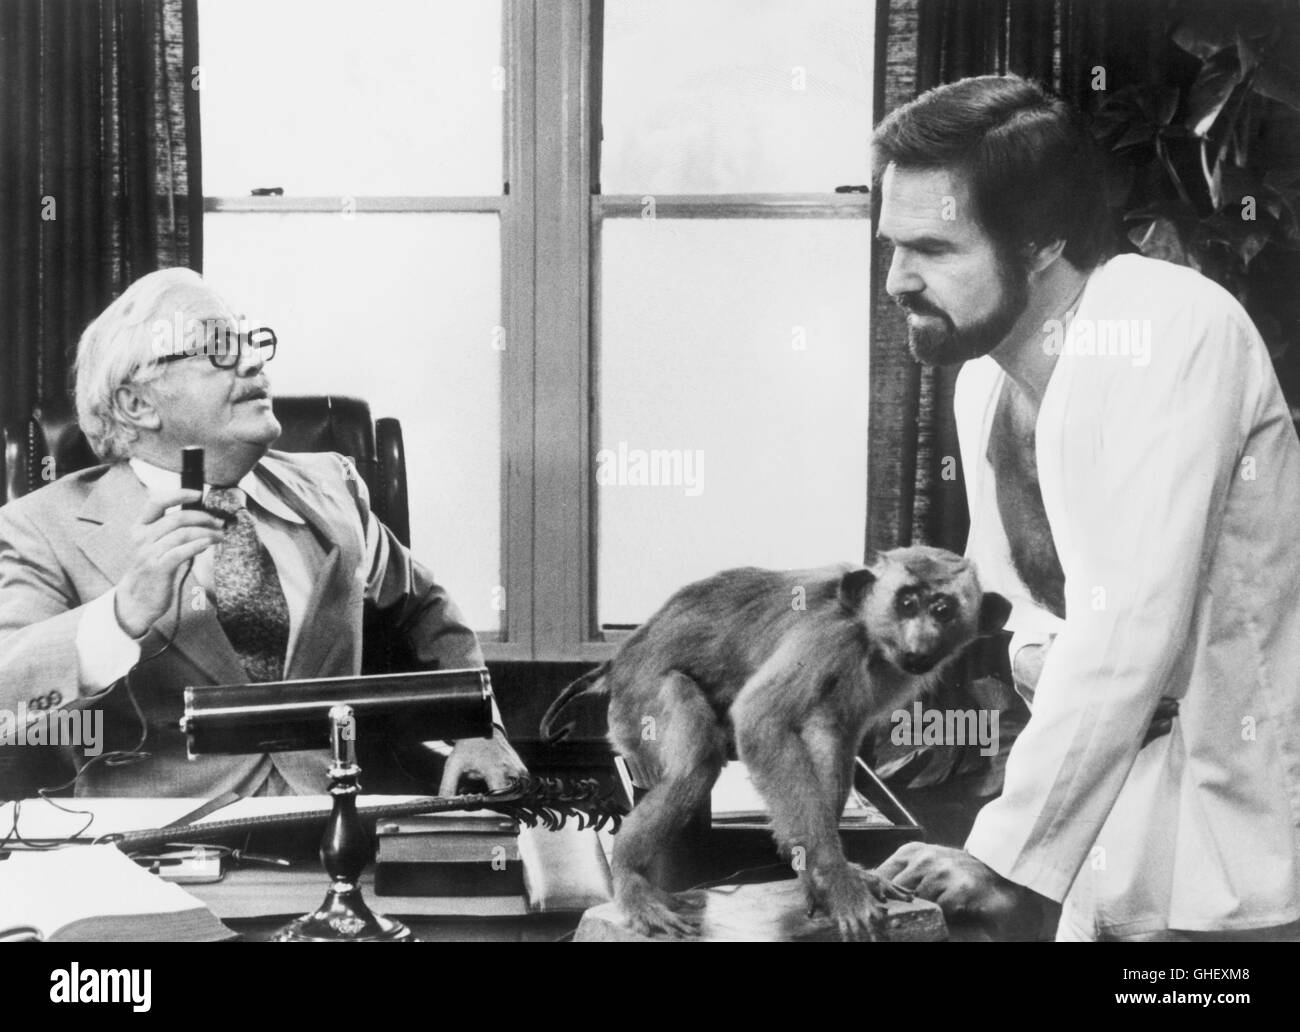 THE END USA 1978 Burt Reynolds Dr. Kling (STROTHER MARTIN) consoles the hysterical Sonny Lawson (BURT REYNOLDS) in a hilarious sequence with a little long-tailed monkey. Regie: Burt Reynolds Stock Photo